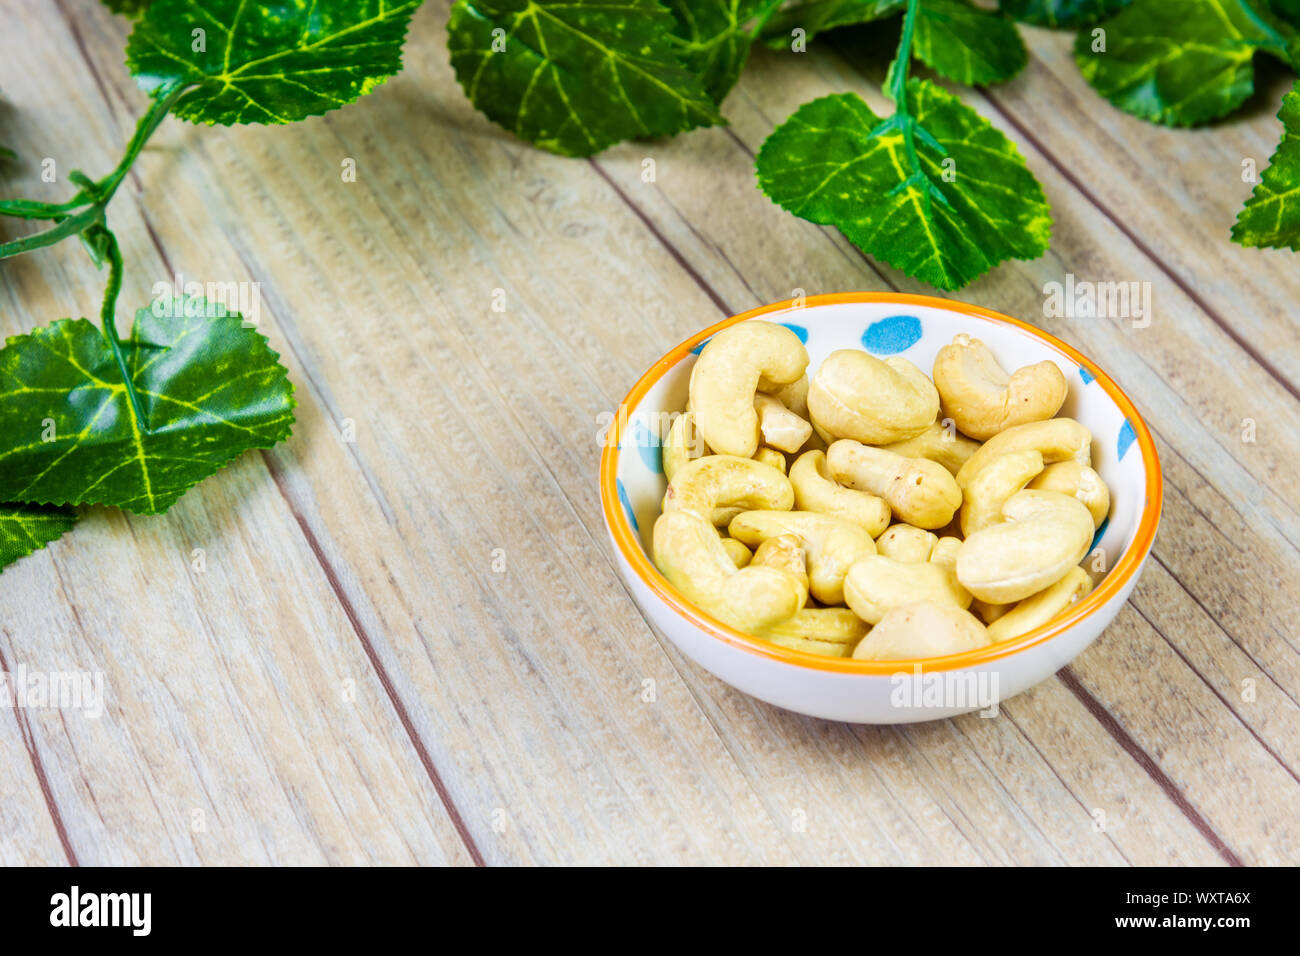 A Bowl of Cashews on a Wooden Background Stock Photo